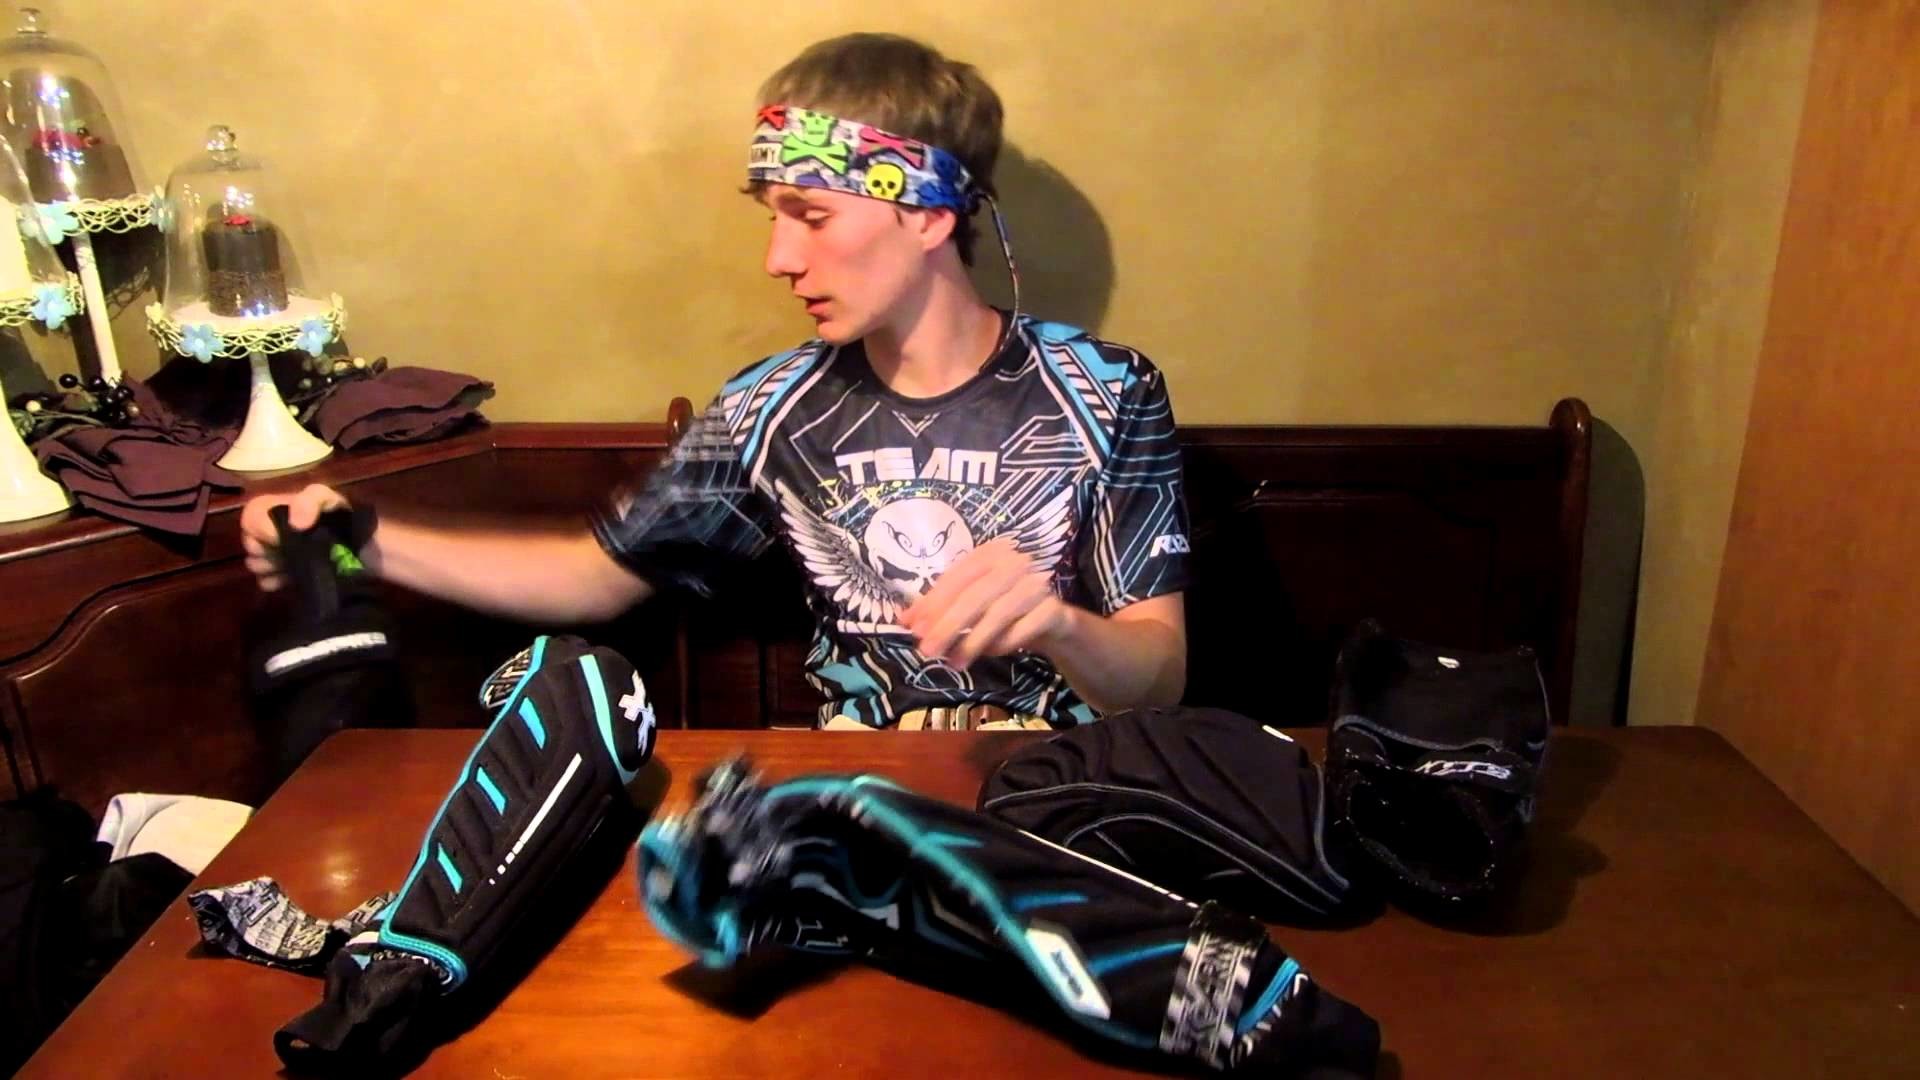 1920x1080 HK Army Elbow Pads and Dye Knee Pads Review: Team Insanity Reviews - YouTube